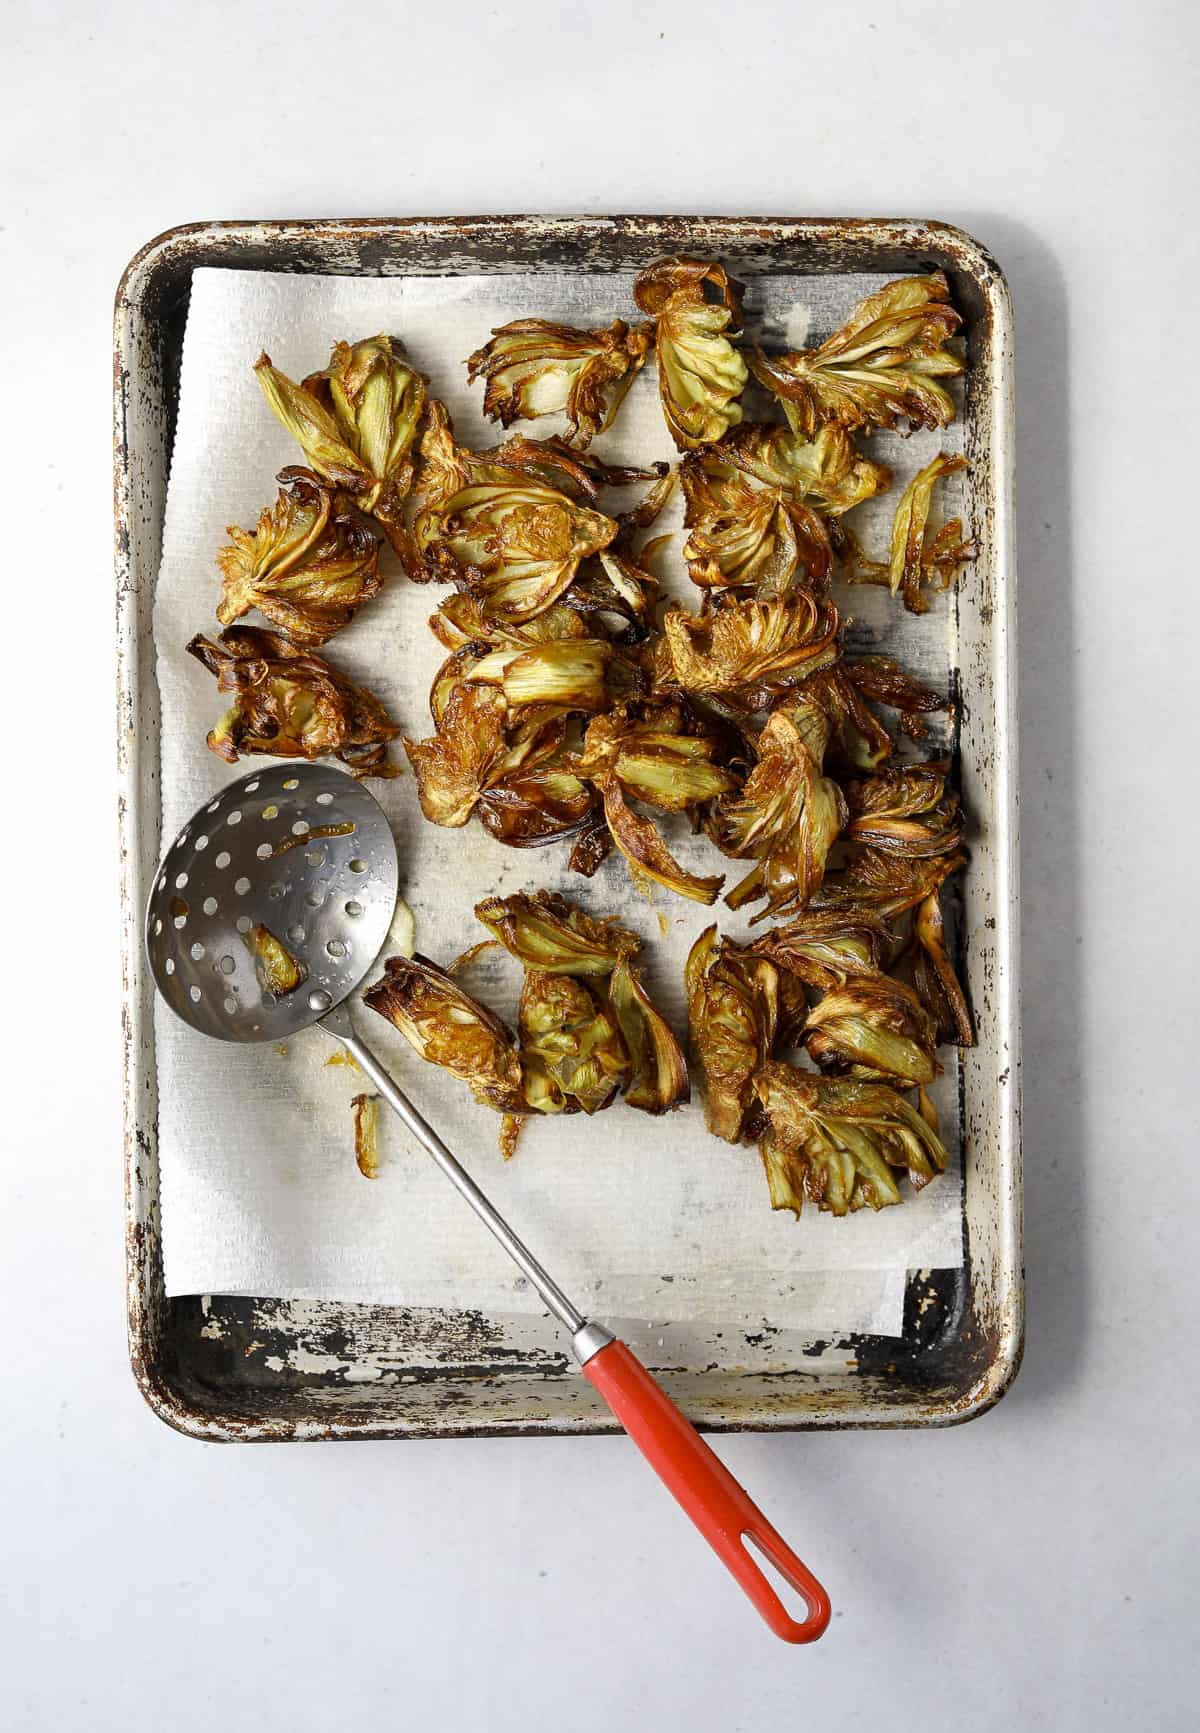 fried artichokes draining on a paper towel lined baking tray